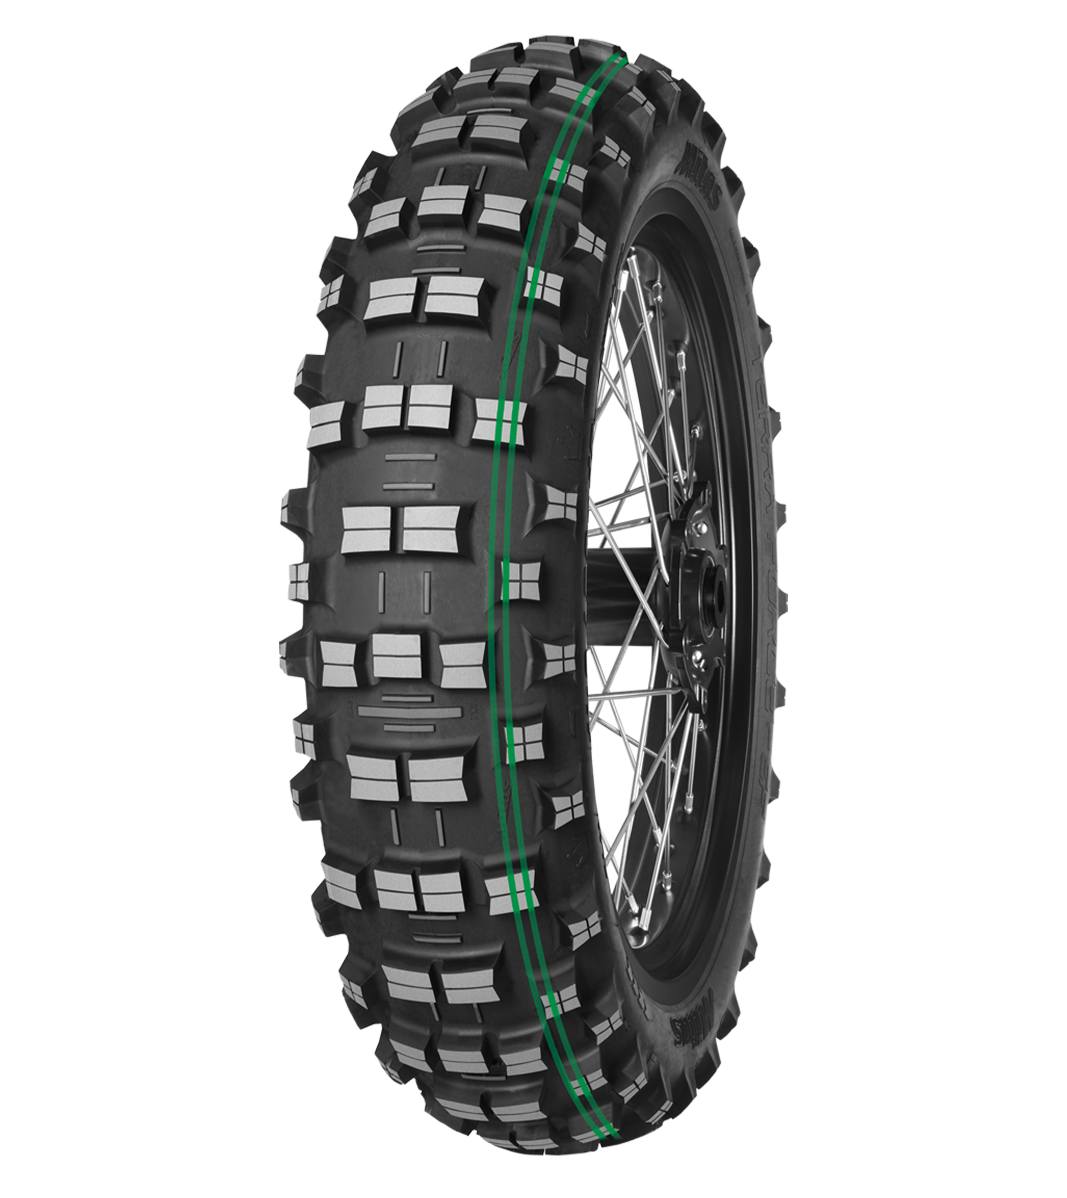 Mitas TERRA FORCE-EH 140/80-18 Enduro Competition Off-Road SUPER SOFT EXTREME 70M 2 Green Tube Rear Tire, 226285, 140/80-18, Enduro Competition, Off-Road, Rear, Terra Force, Terra Force-EH, Trail, Tires - Imported and distributed in North &amp; South America by Lindeco Genuine Powersports - Premier Powersports Equipment and Accessories for Motorcycle Enthusiasts, Professional Riders and Dealers.